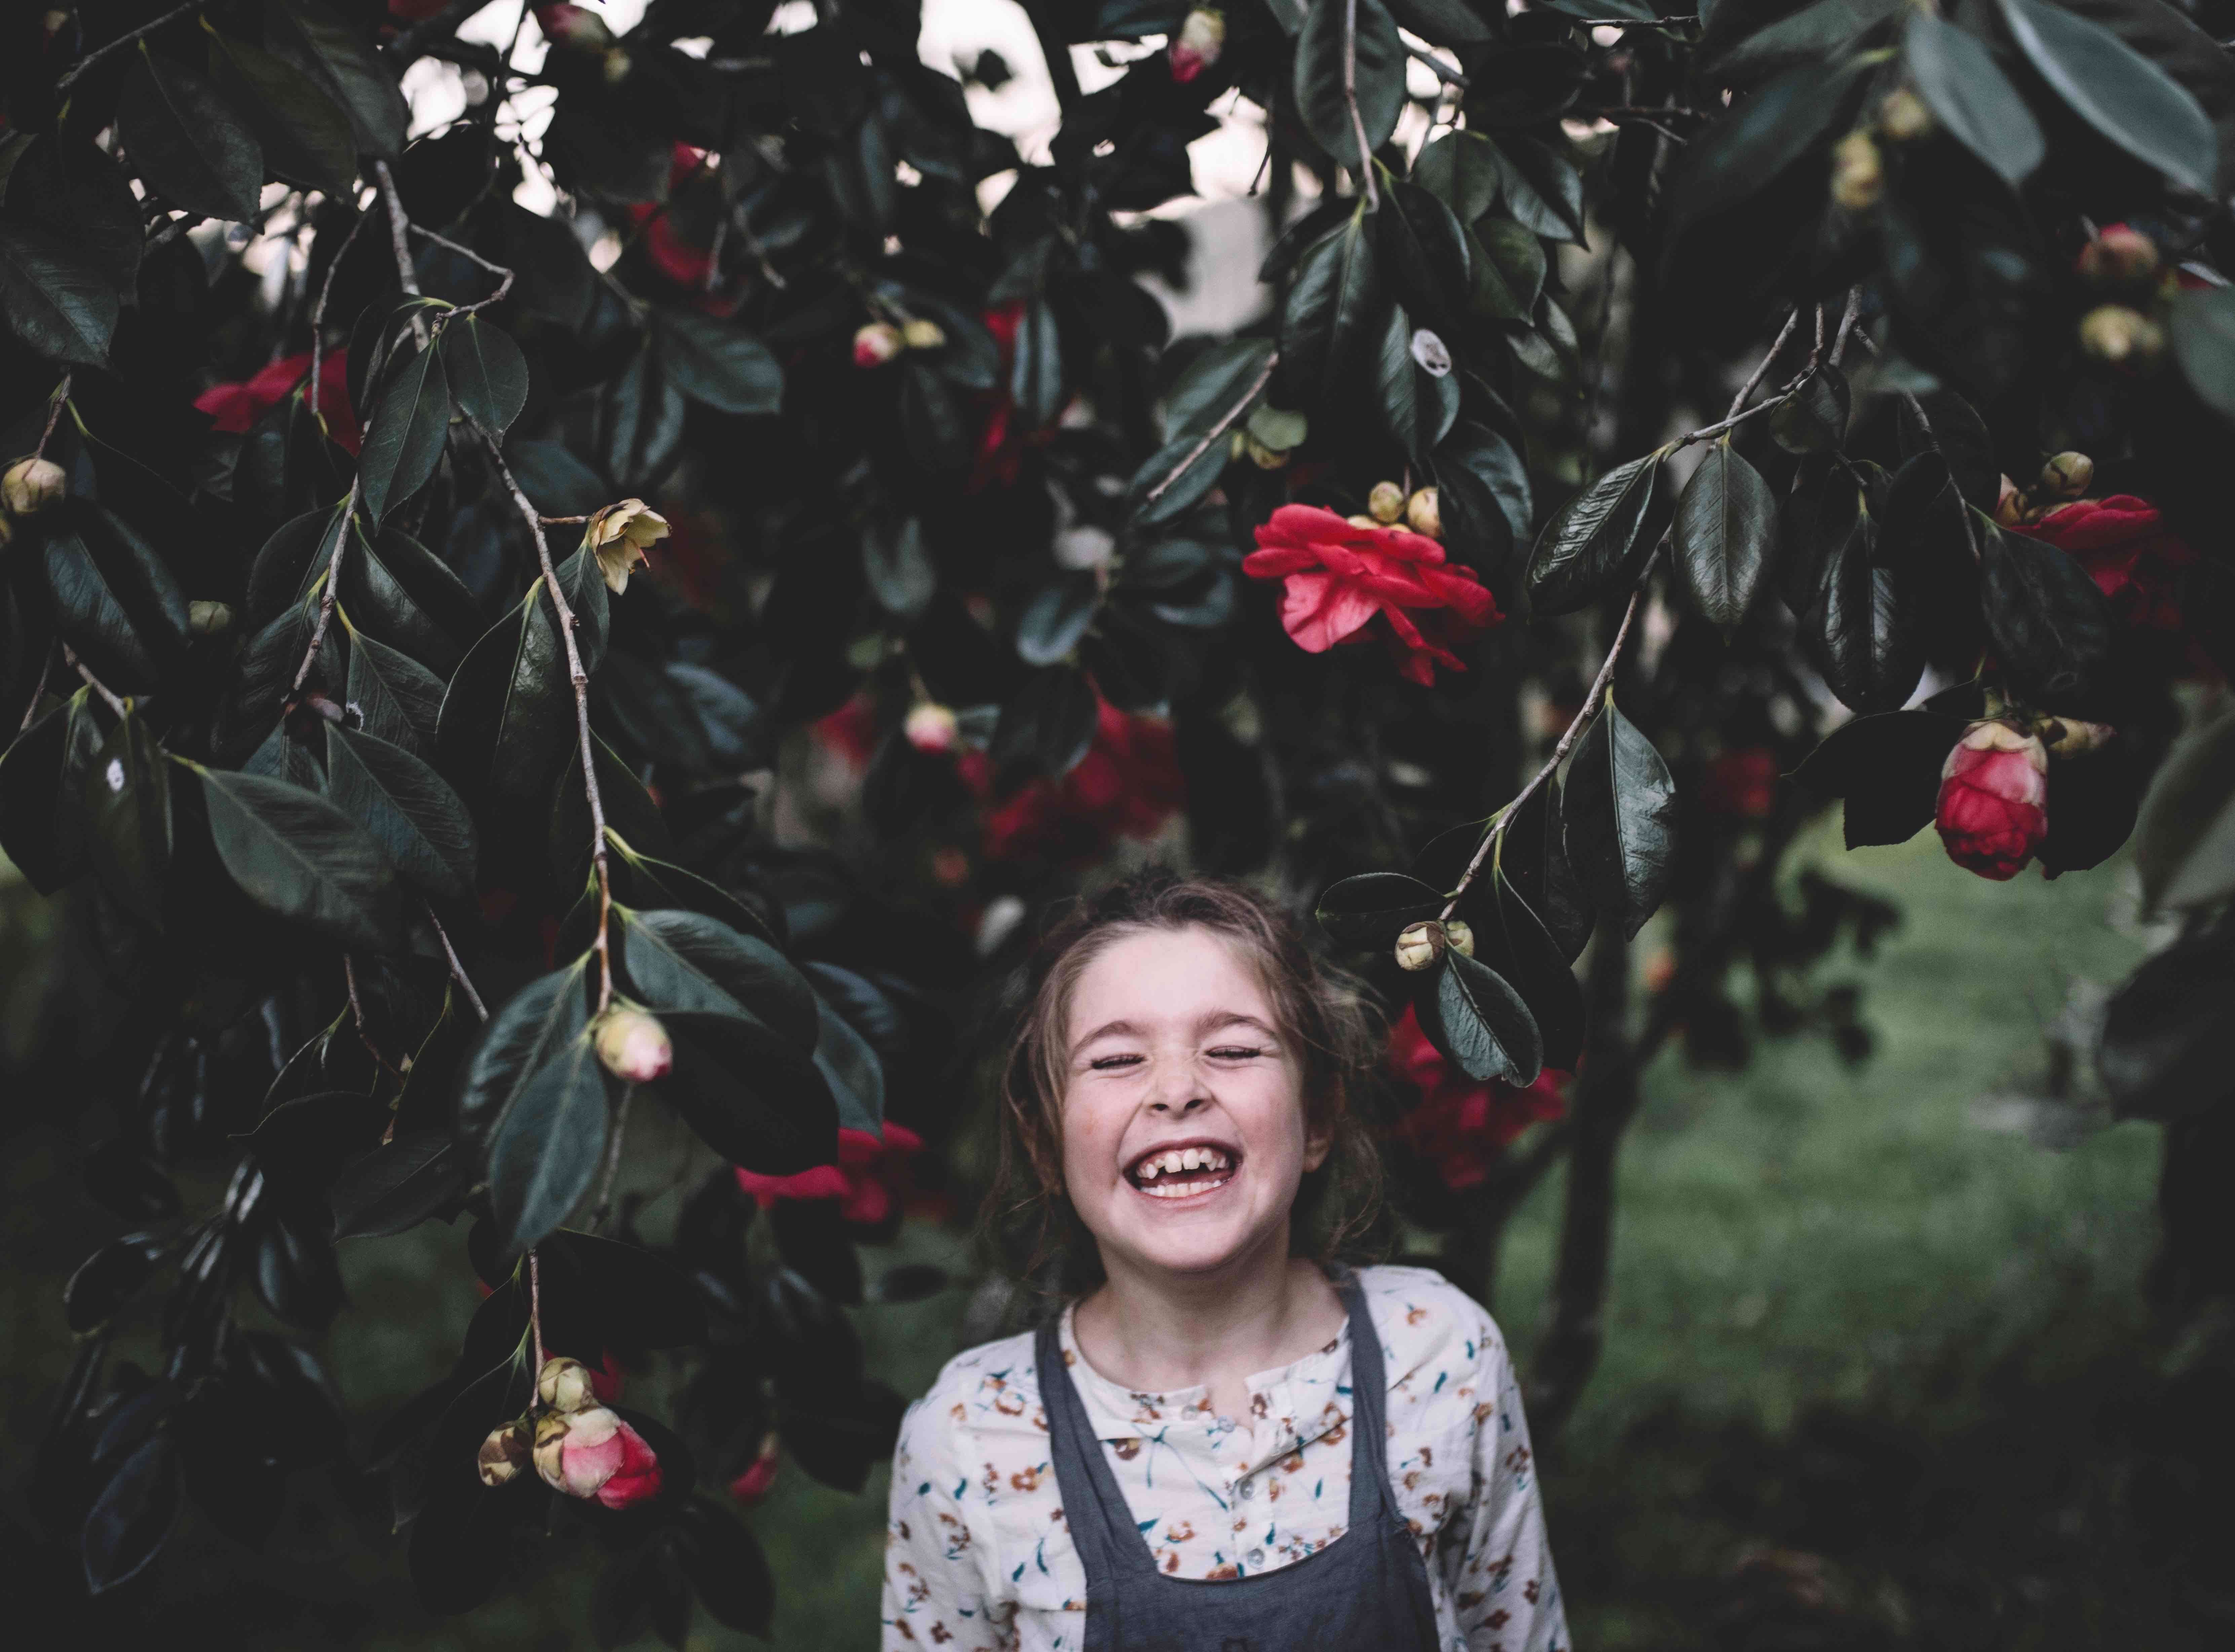 Young girl smiling with eyes closed under a flowering tree